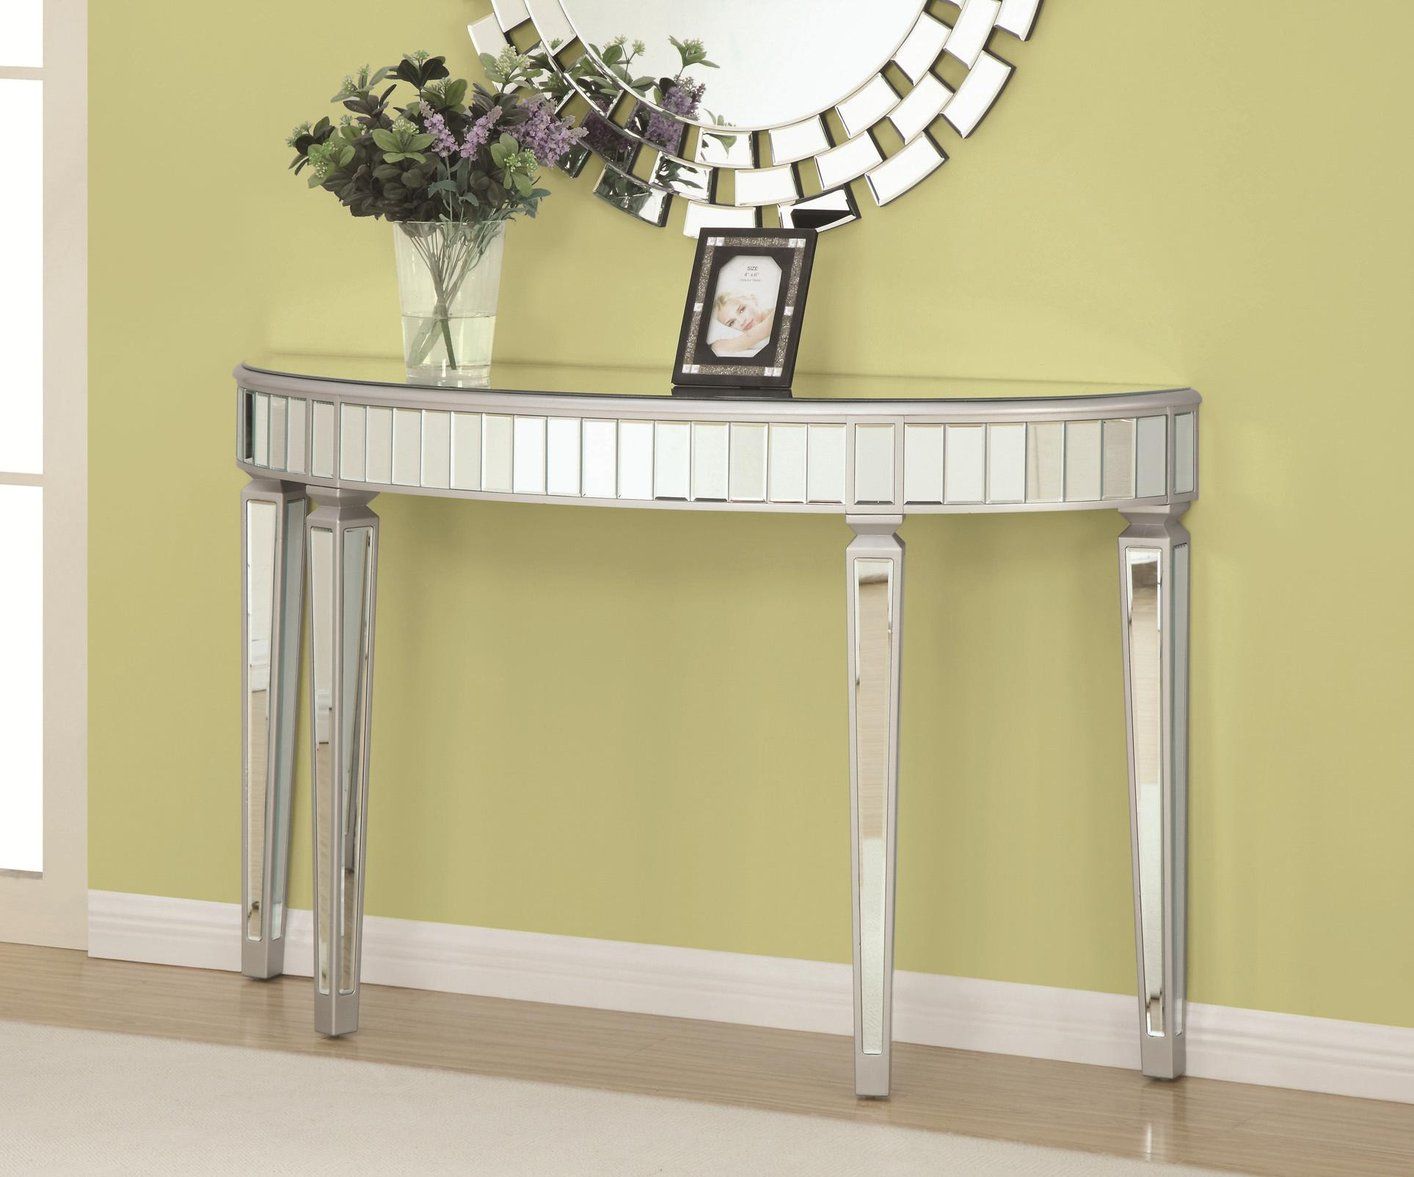 Silver Metal Console Table – Steal A Sofa Furniture Outlet Los Angeles Ca Regarding Metal Console Tables (View 20 of 20)